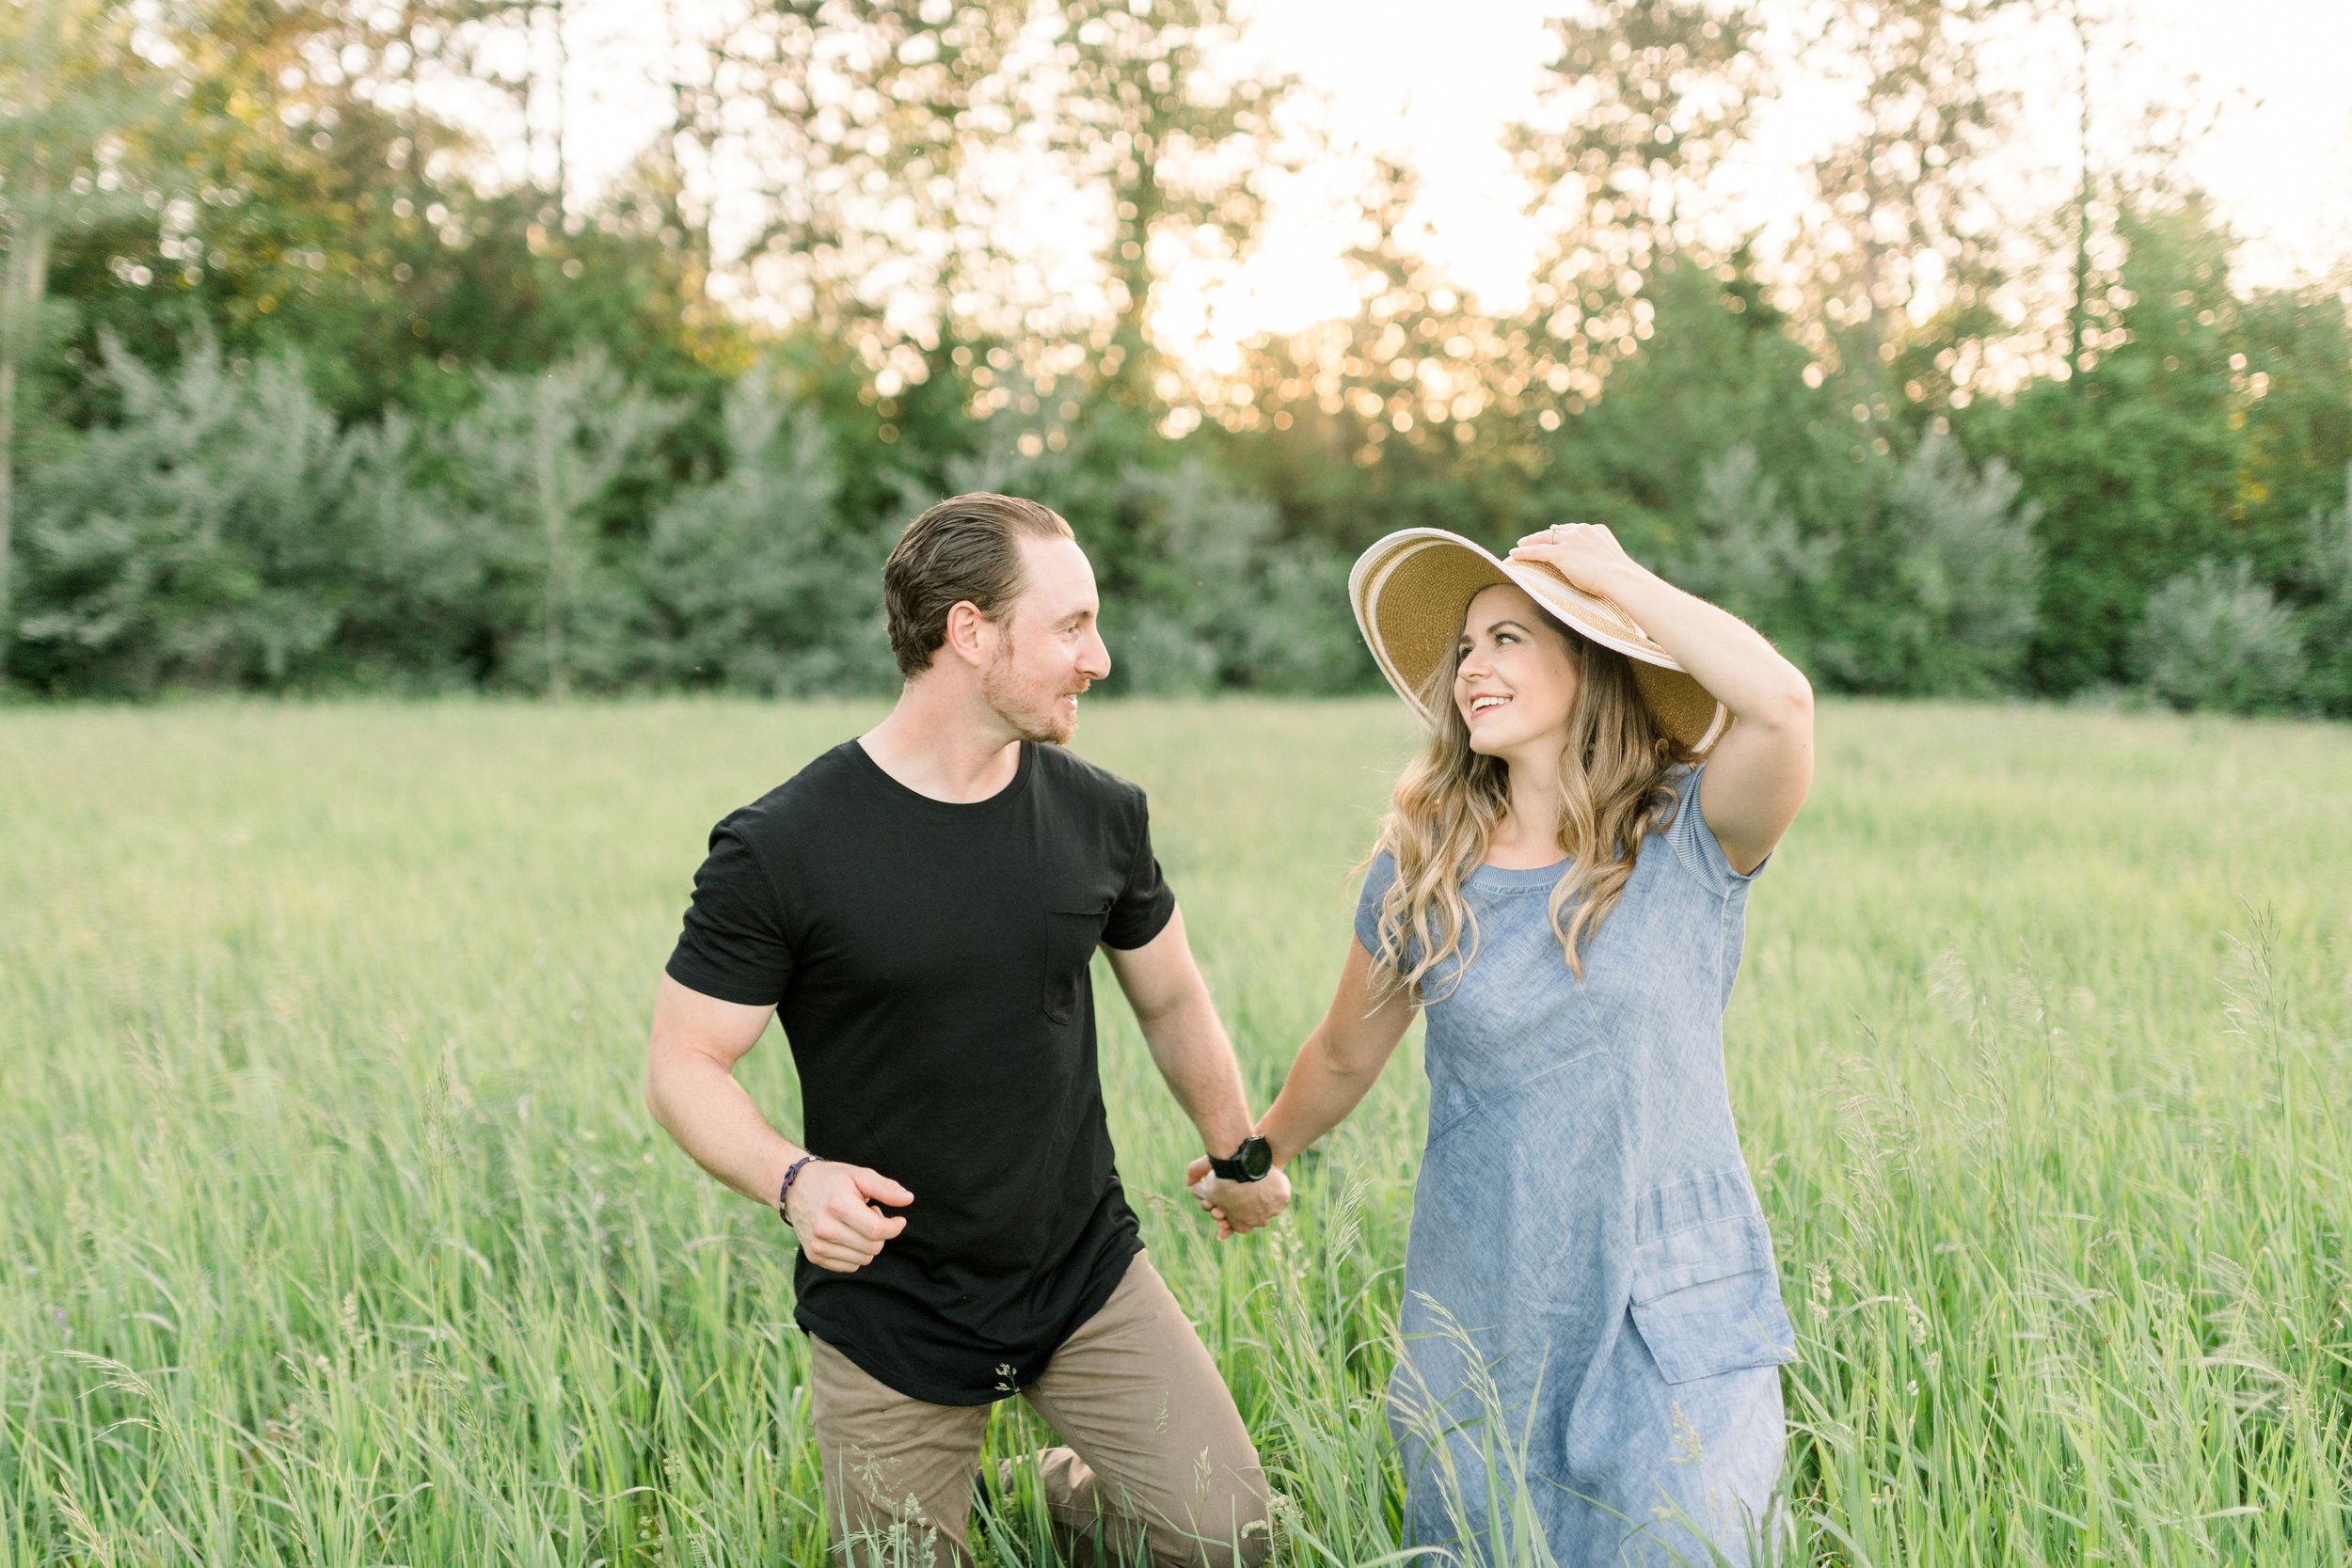  Engagement portrait with a woman wearing floppy sunhat in the mountain by Chelsea Mason Photography. floppy sunhat mountain #chelseamasonphotography #chelseamasonengagements #Ottawaengagments #Almonteengagementphotographer #outdoorengagments 